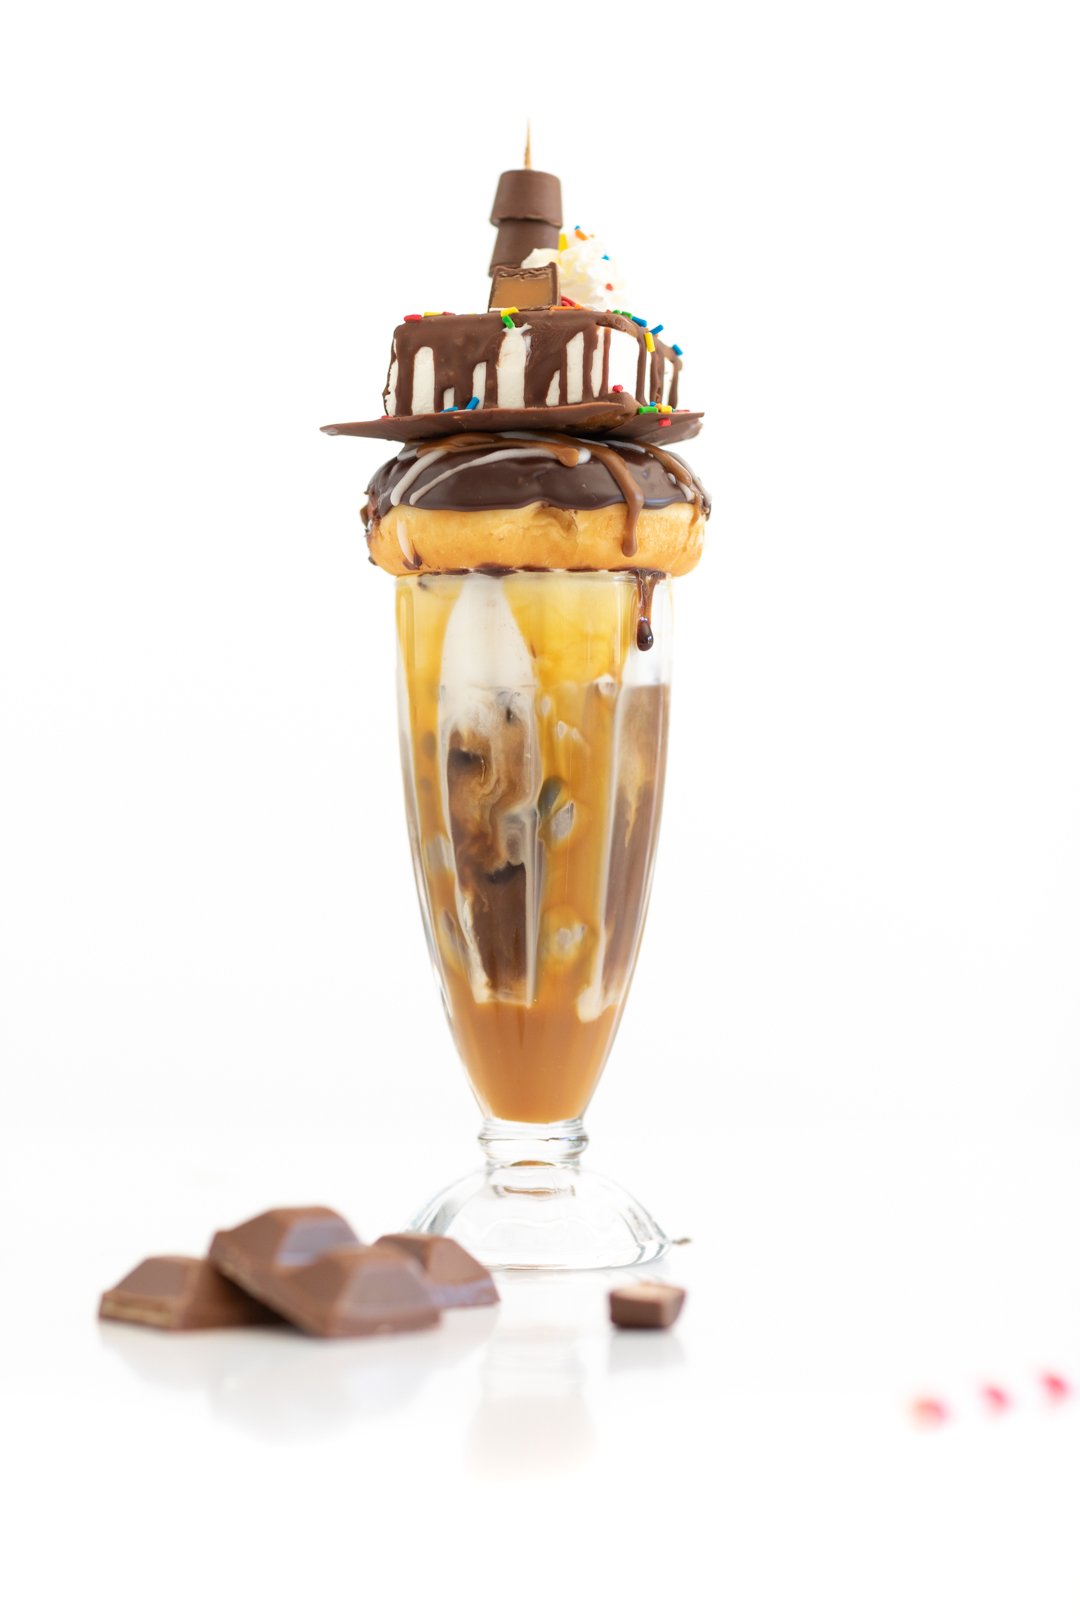 adding layers of sweets and desserts to the top of an iced coffee to make it fancy